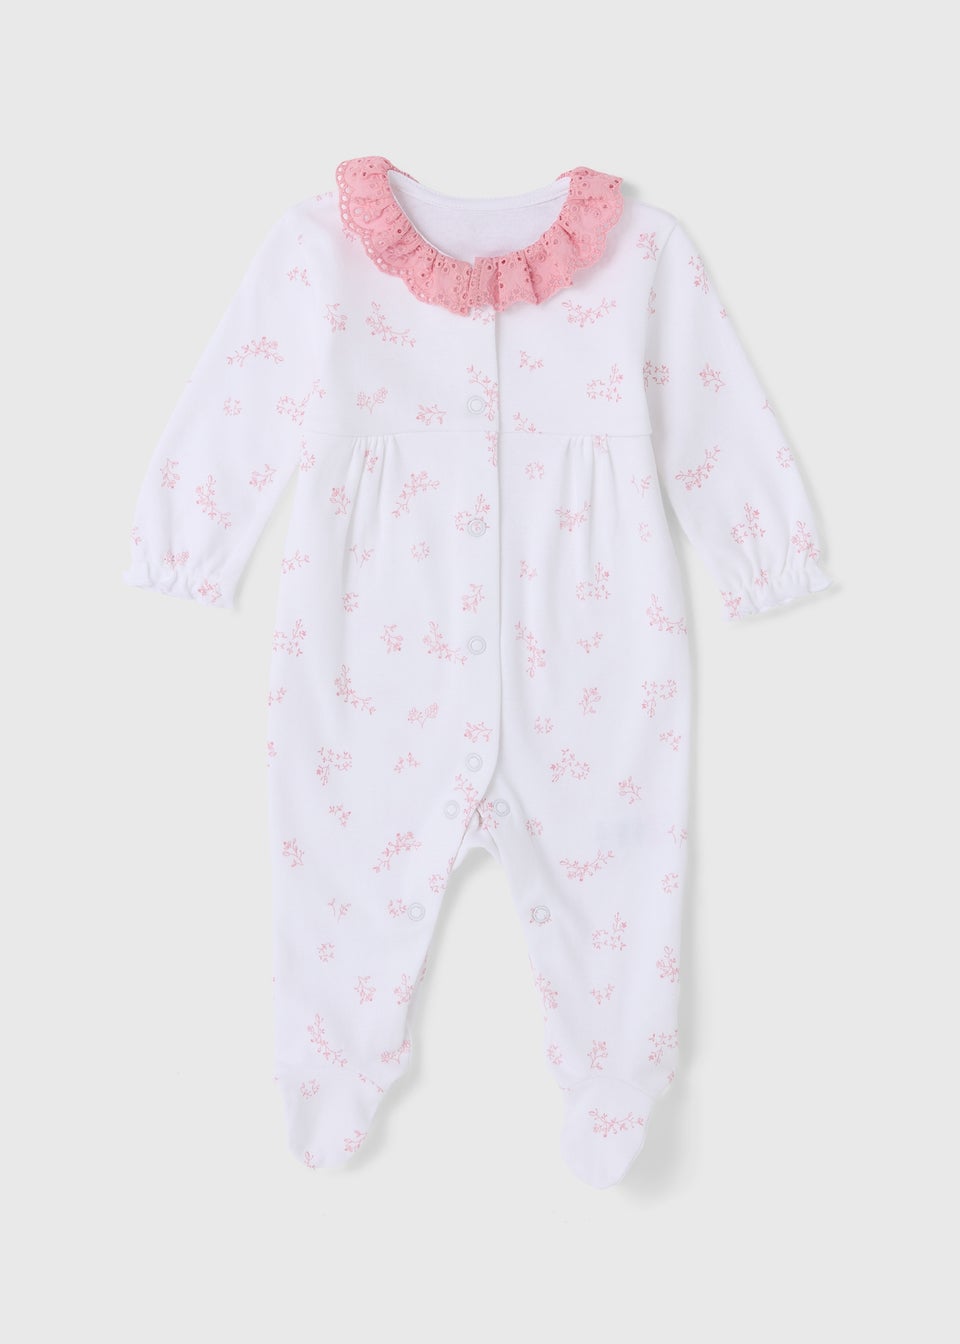 Baby White Floral Lace Sleepsuit (Tiny Baby-23mths)